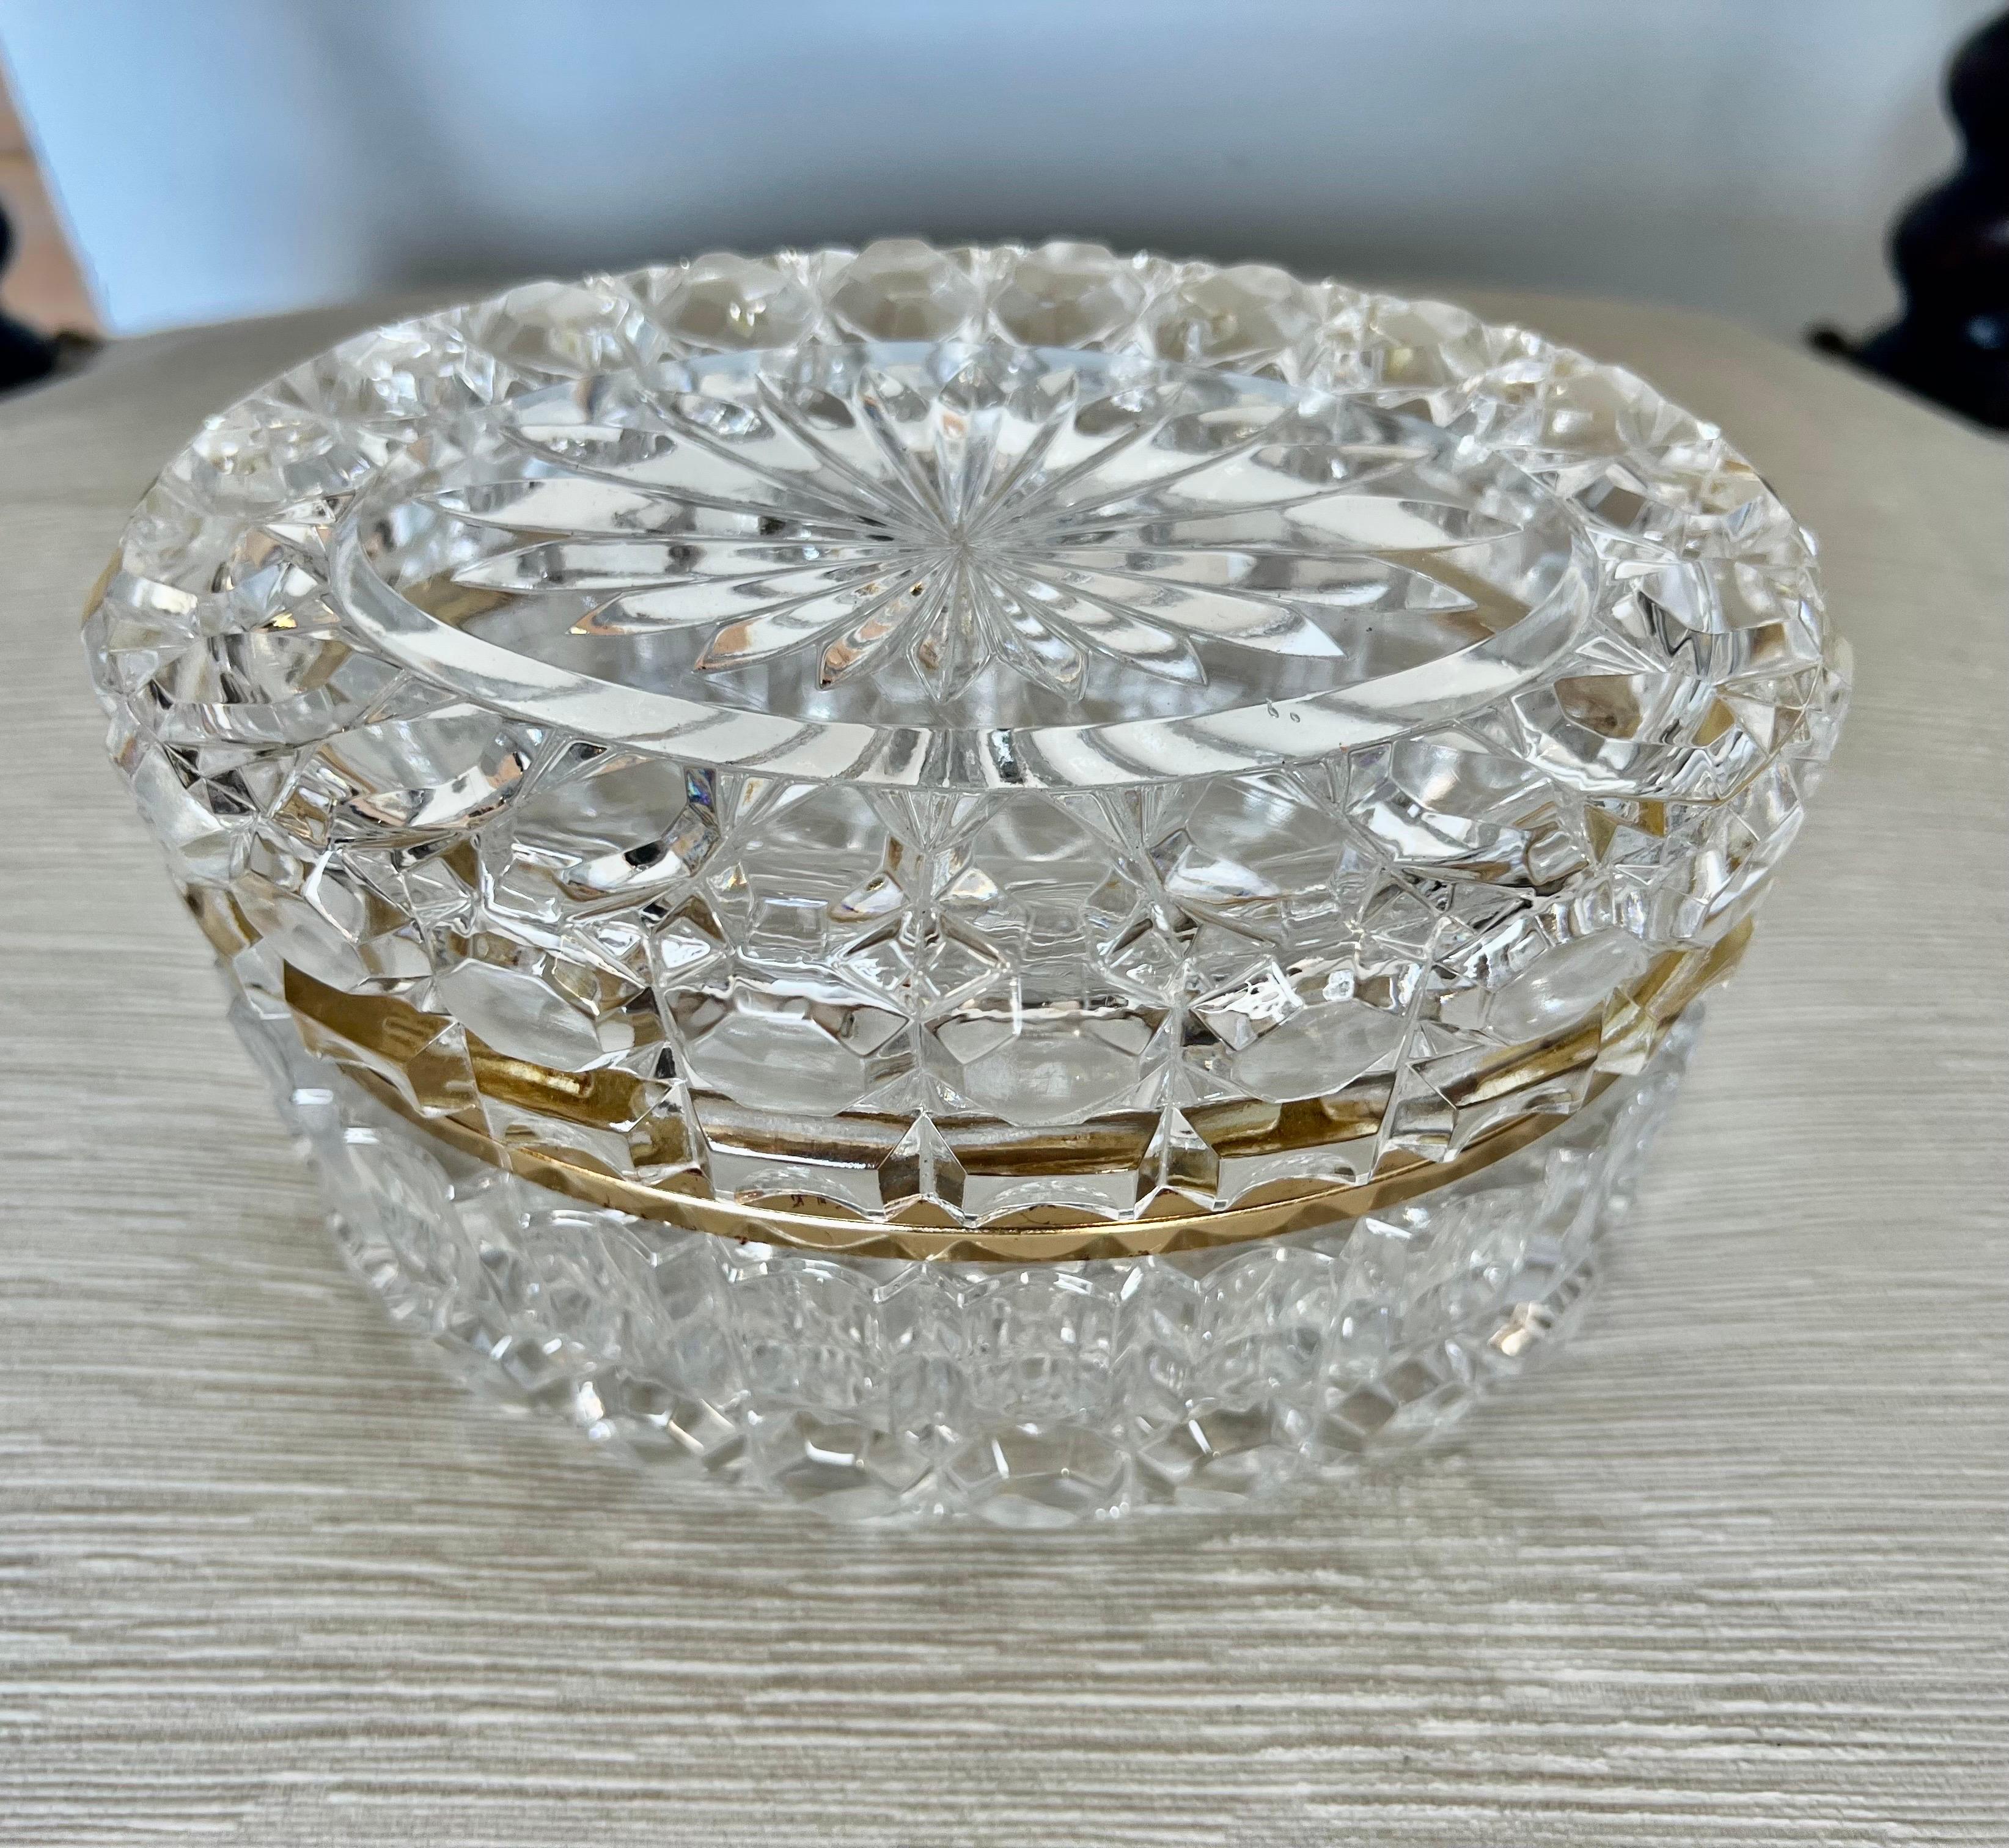 Oval shaped early 20th century French cut crystal jewelry box with brass rim.